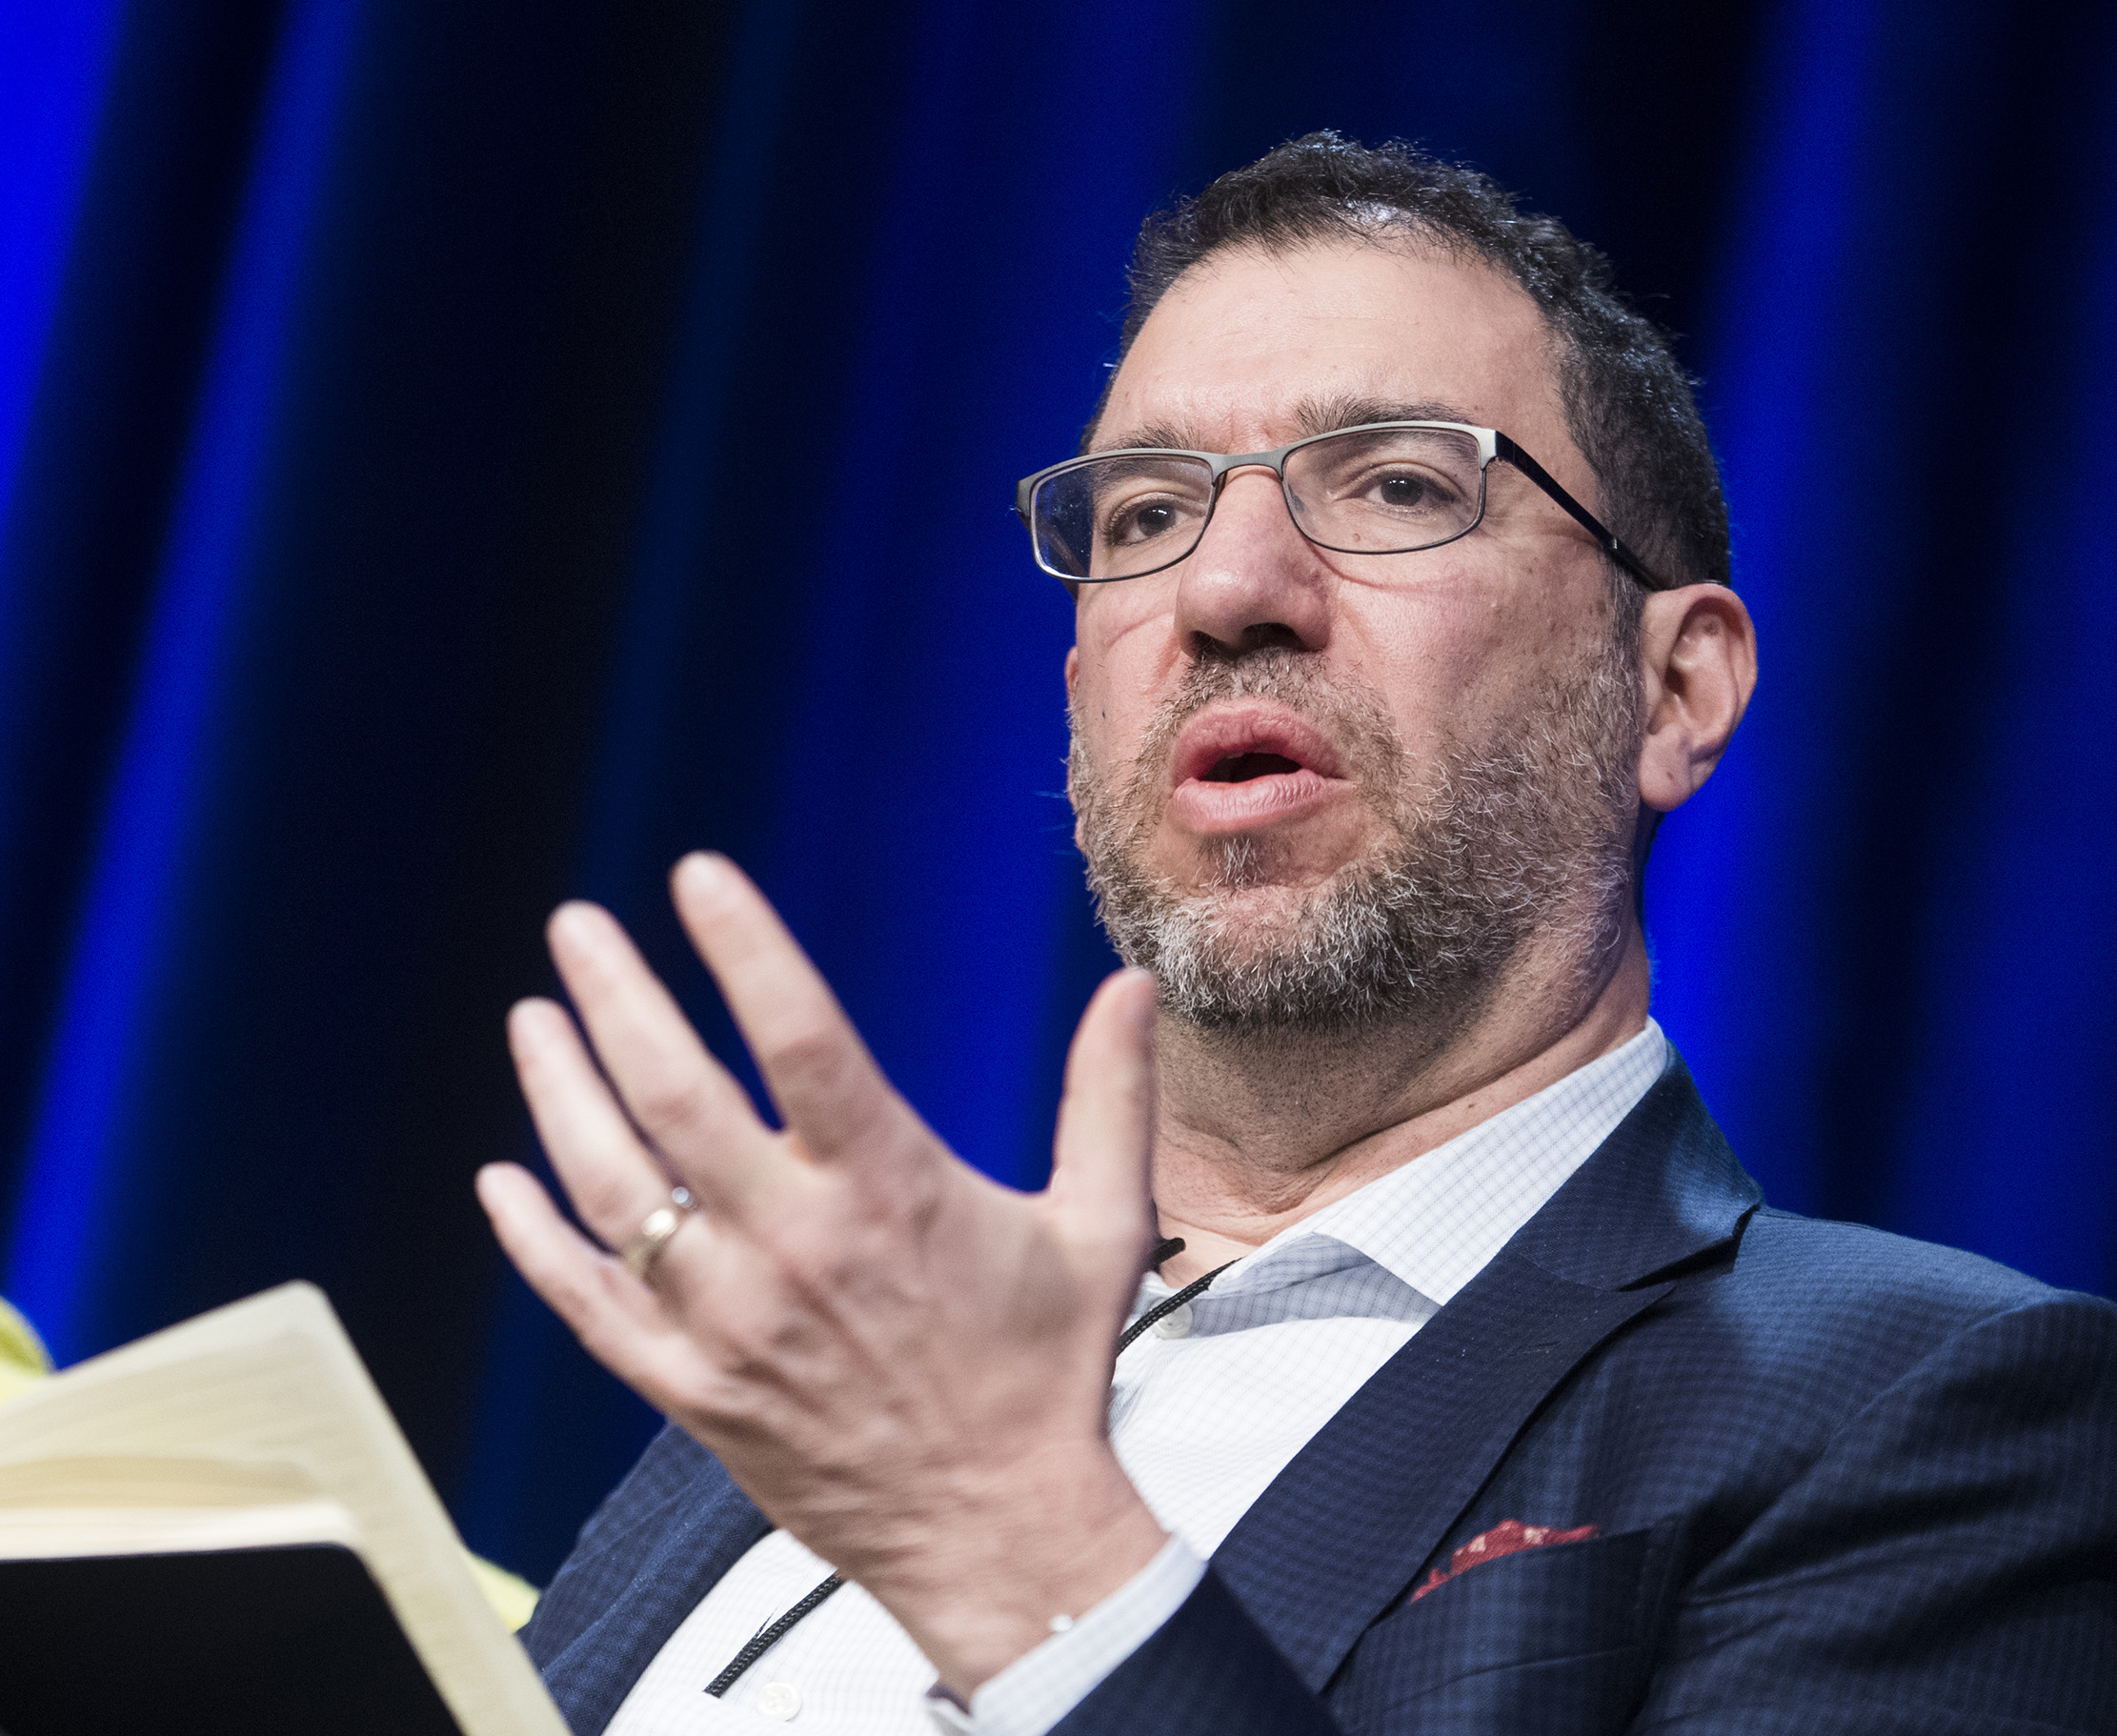 PHOTO: Andy Slavitt speaks during a health care panel discussion at the House Democrats' 2019 Issues Conference at the Lansdowne Resort and Spa in Leesburg, Va., on April 11, 2019.